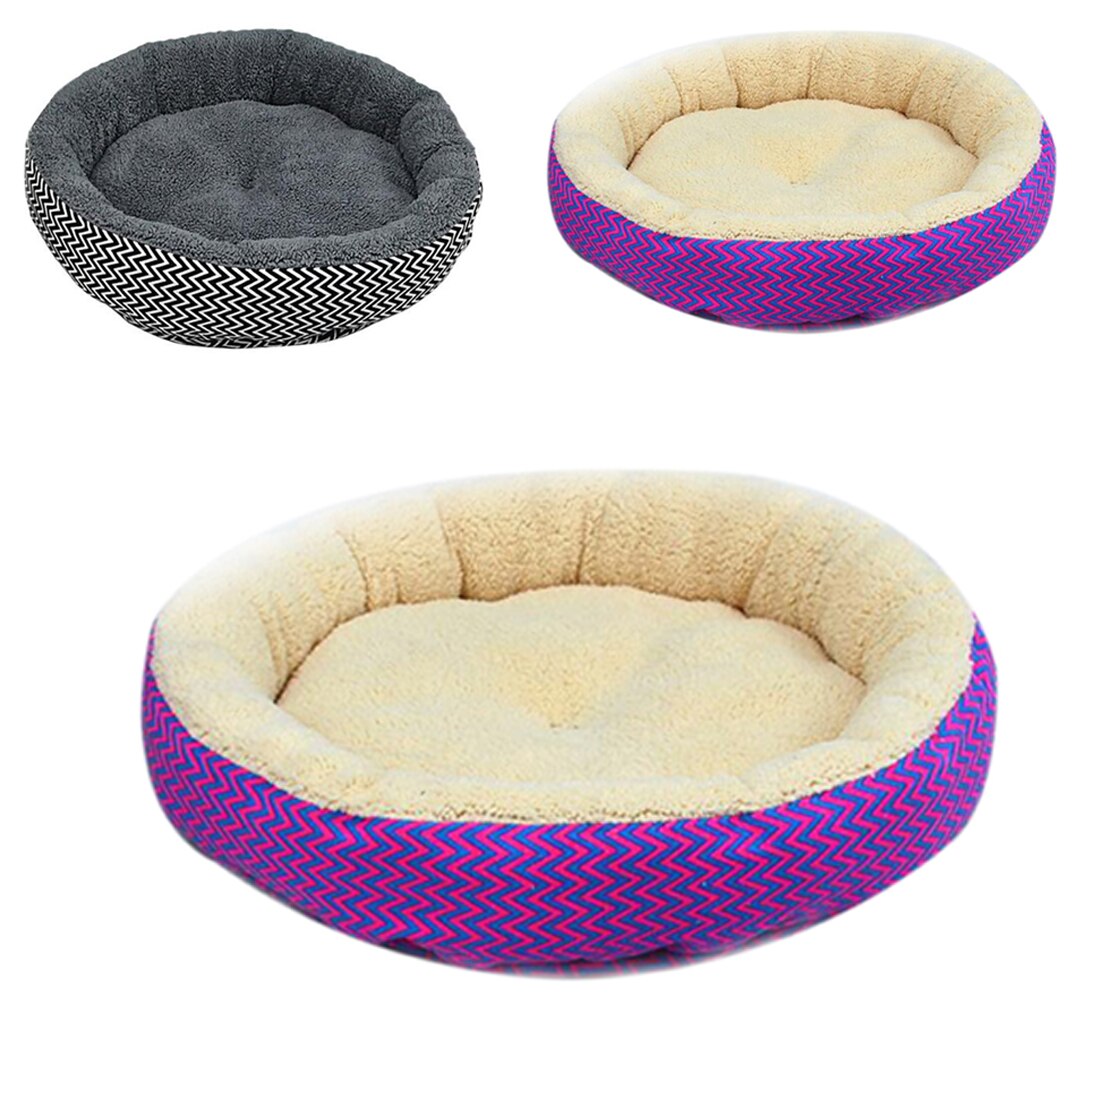 Fashion Dog Beds Mats 2 Colors Round Soft Dog House Bed Striped Pet Cat And Dog Bed Grey /Red-Blue Size S M Pet Products